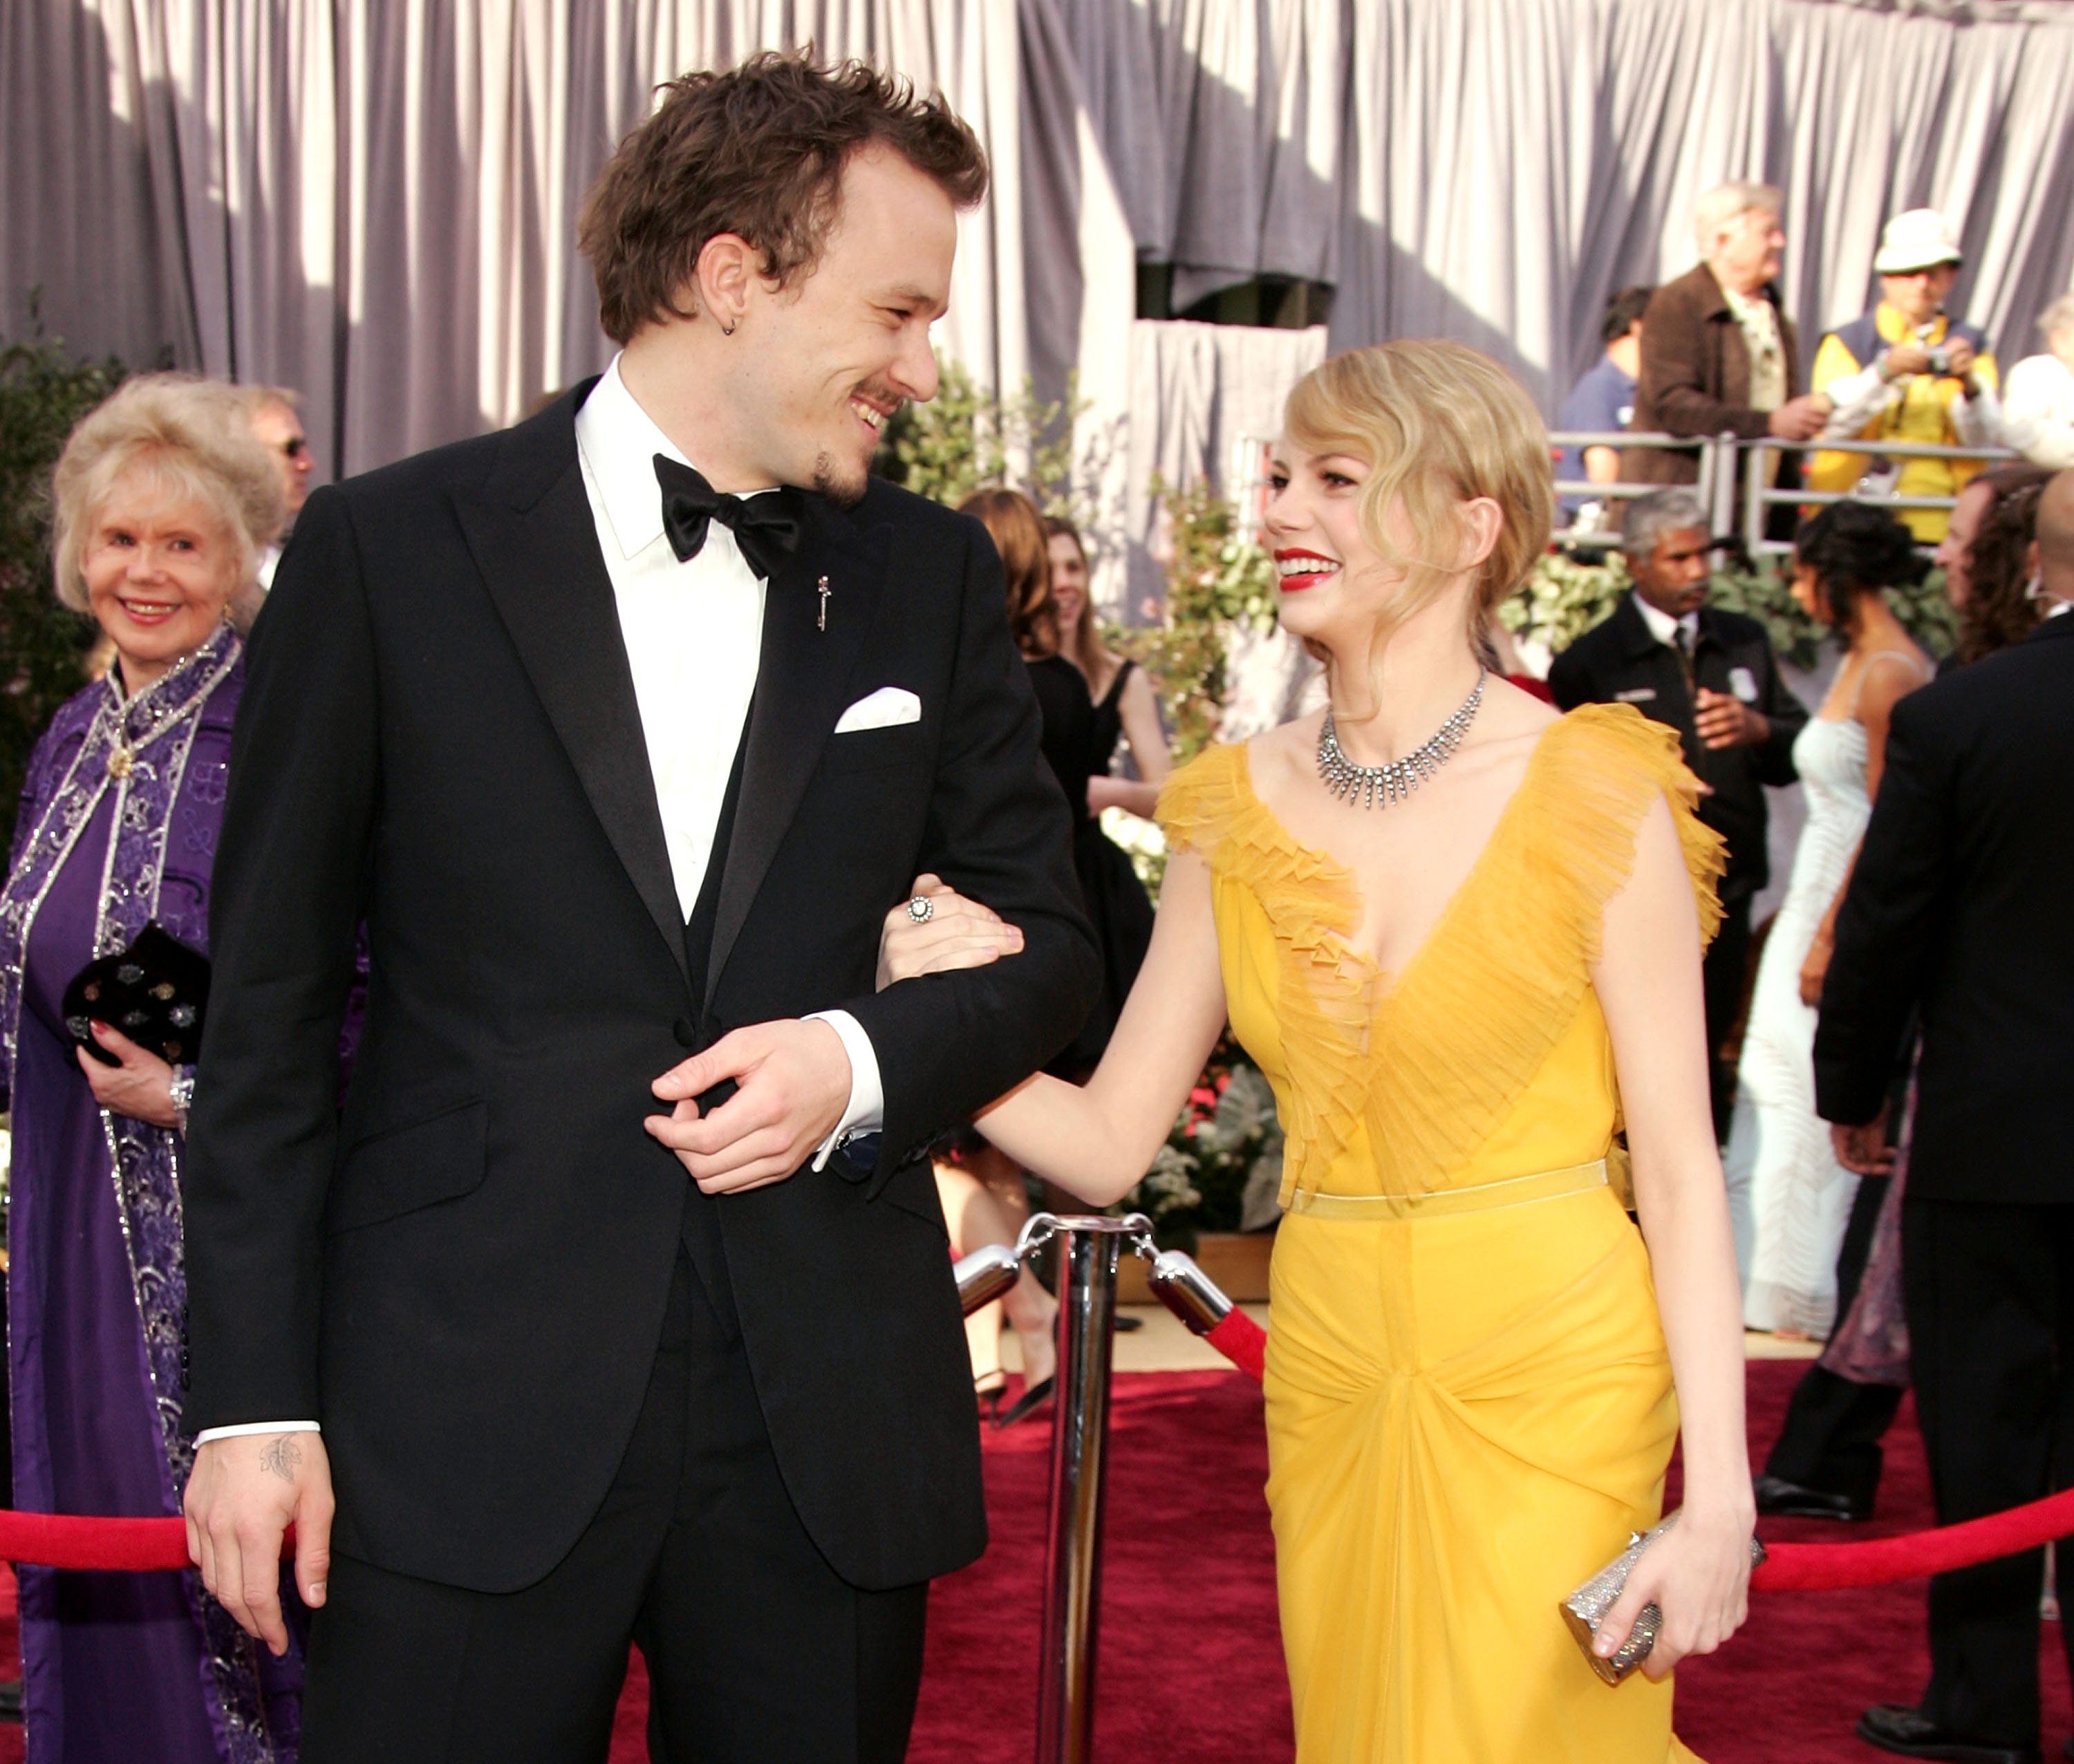 Heath Ledger and Michelle Williams at the 78th Annual Academy Awards on March 5, 2006 | Source: Getty Images